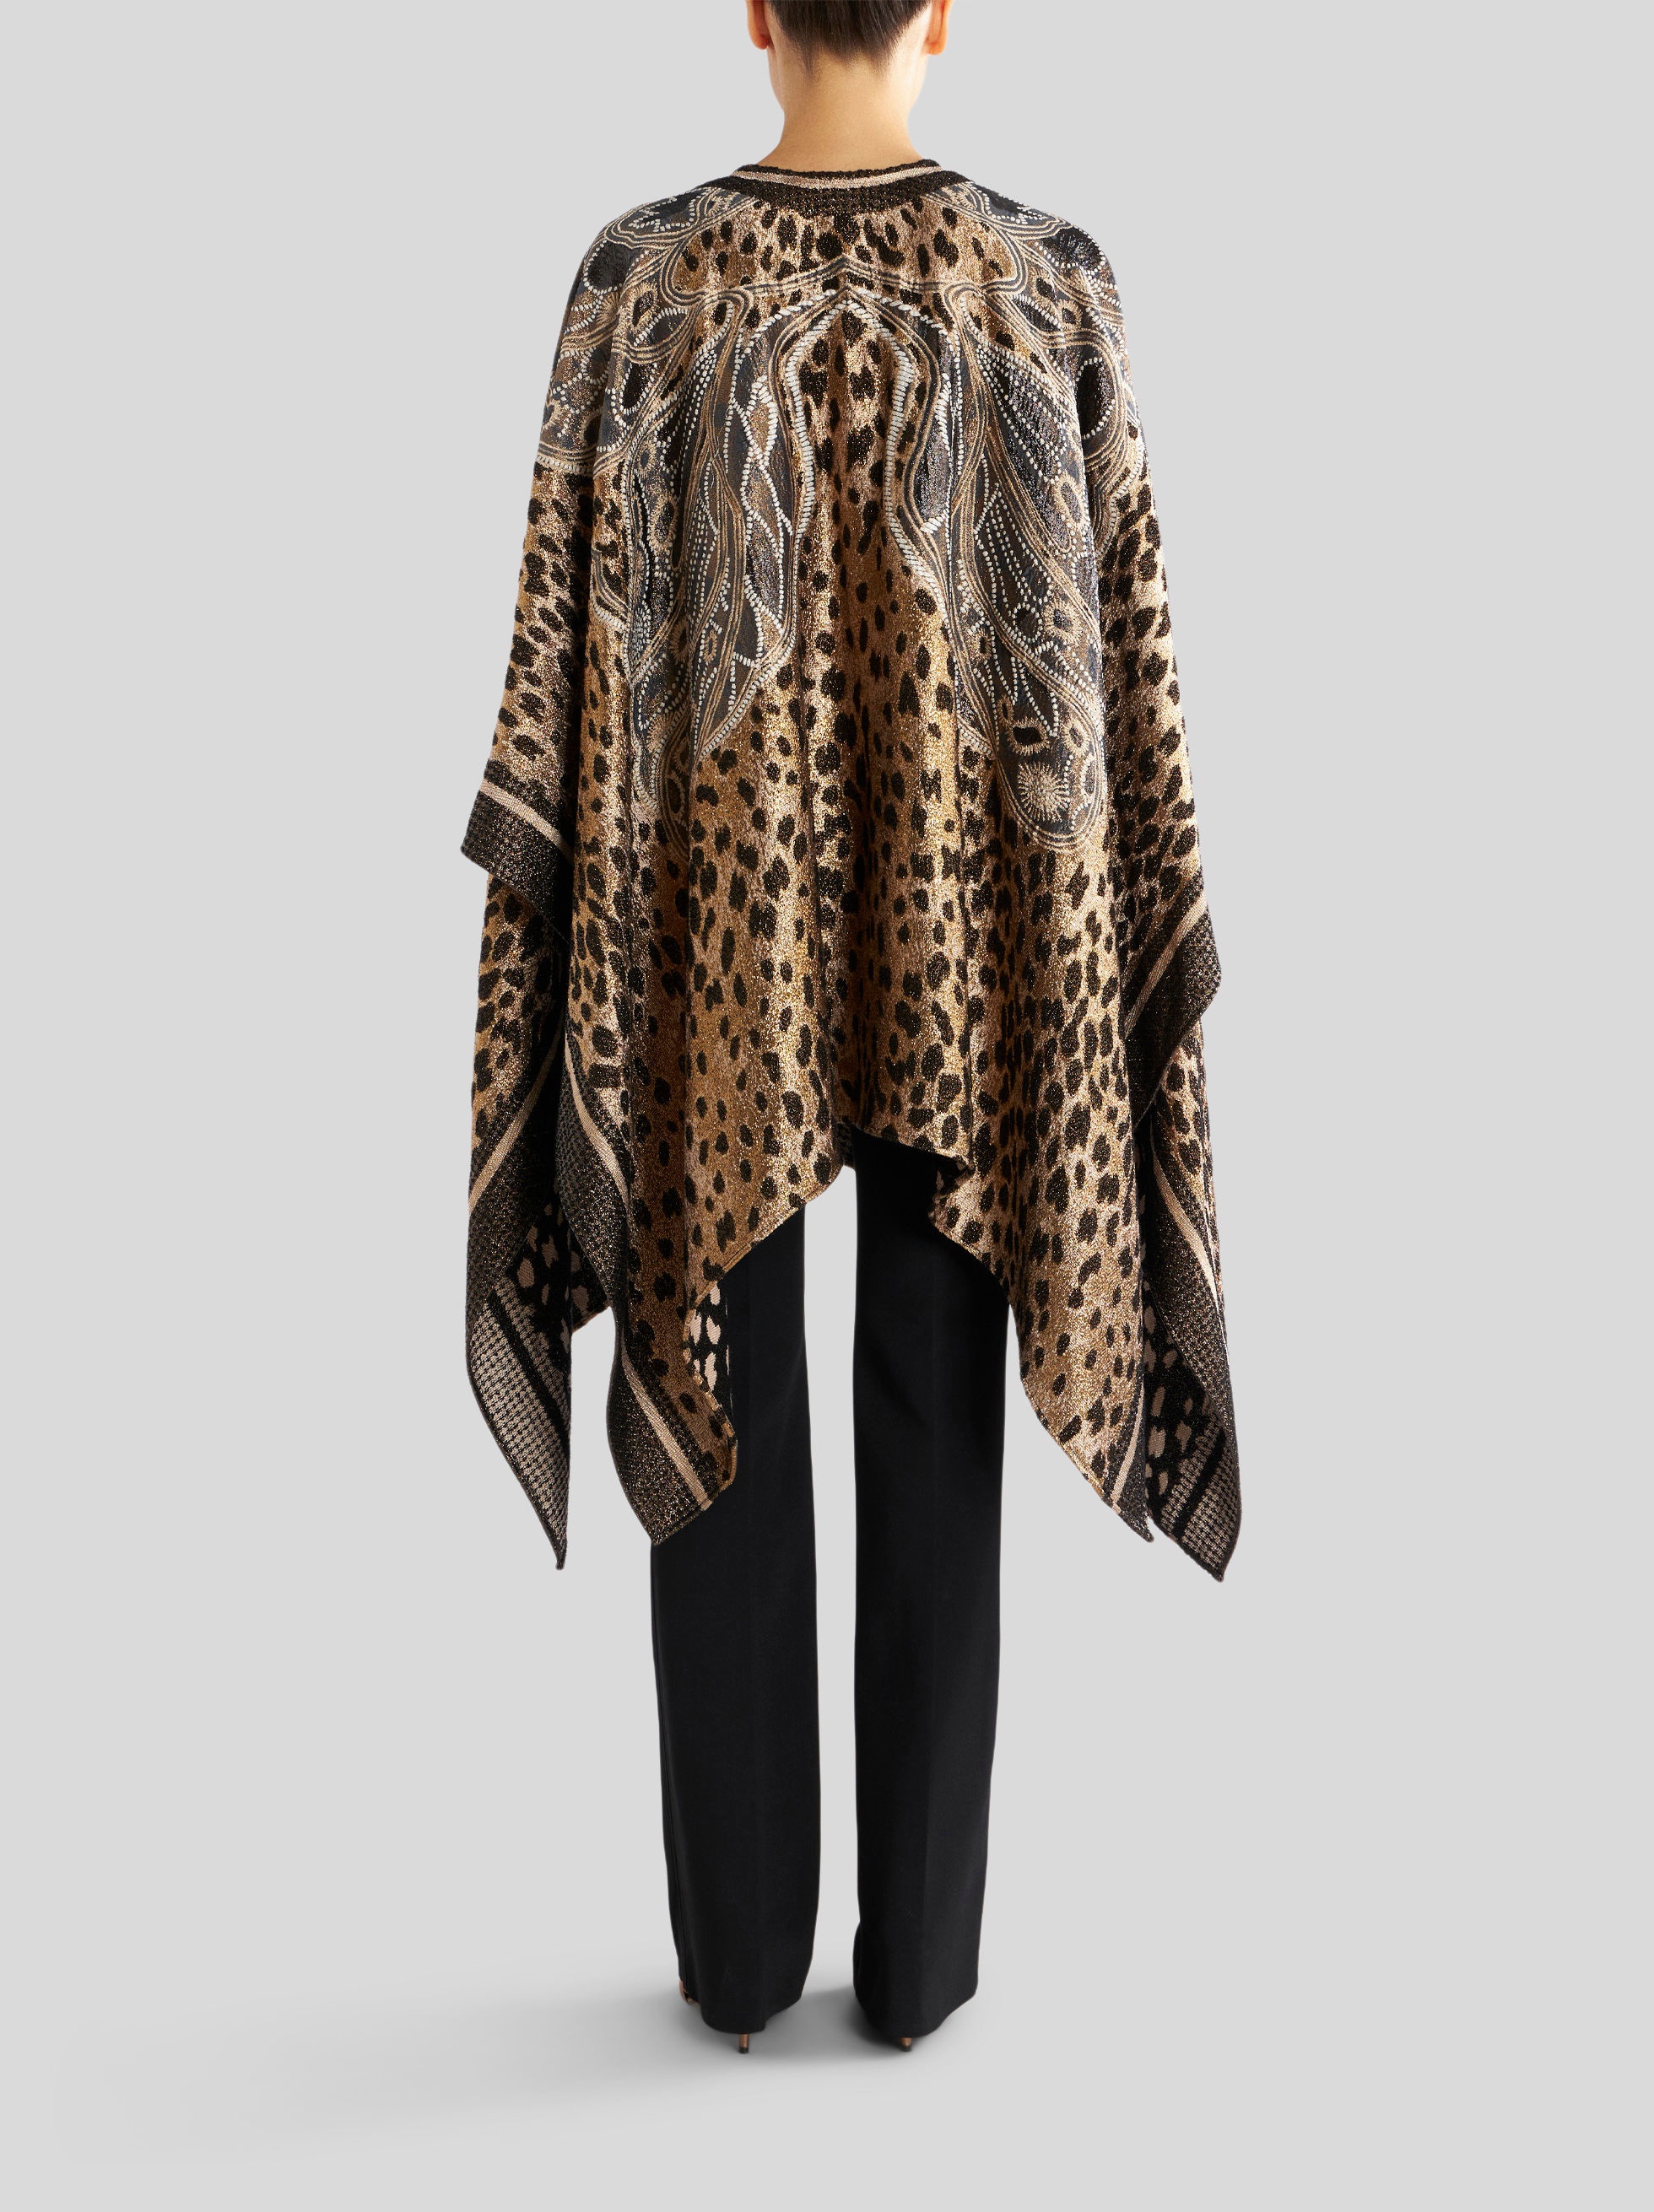 CHEETAH CAPE WITH BUTTERFLY DESIGN - 4